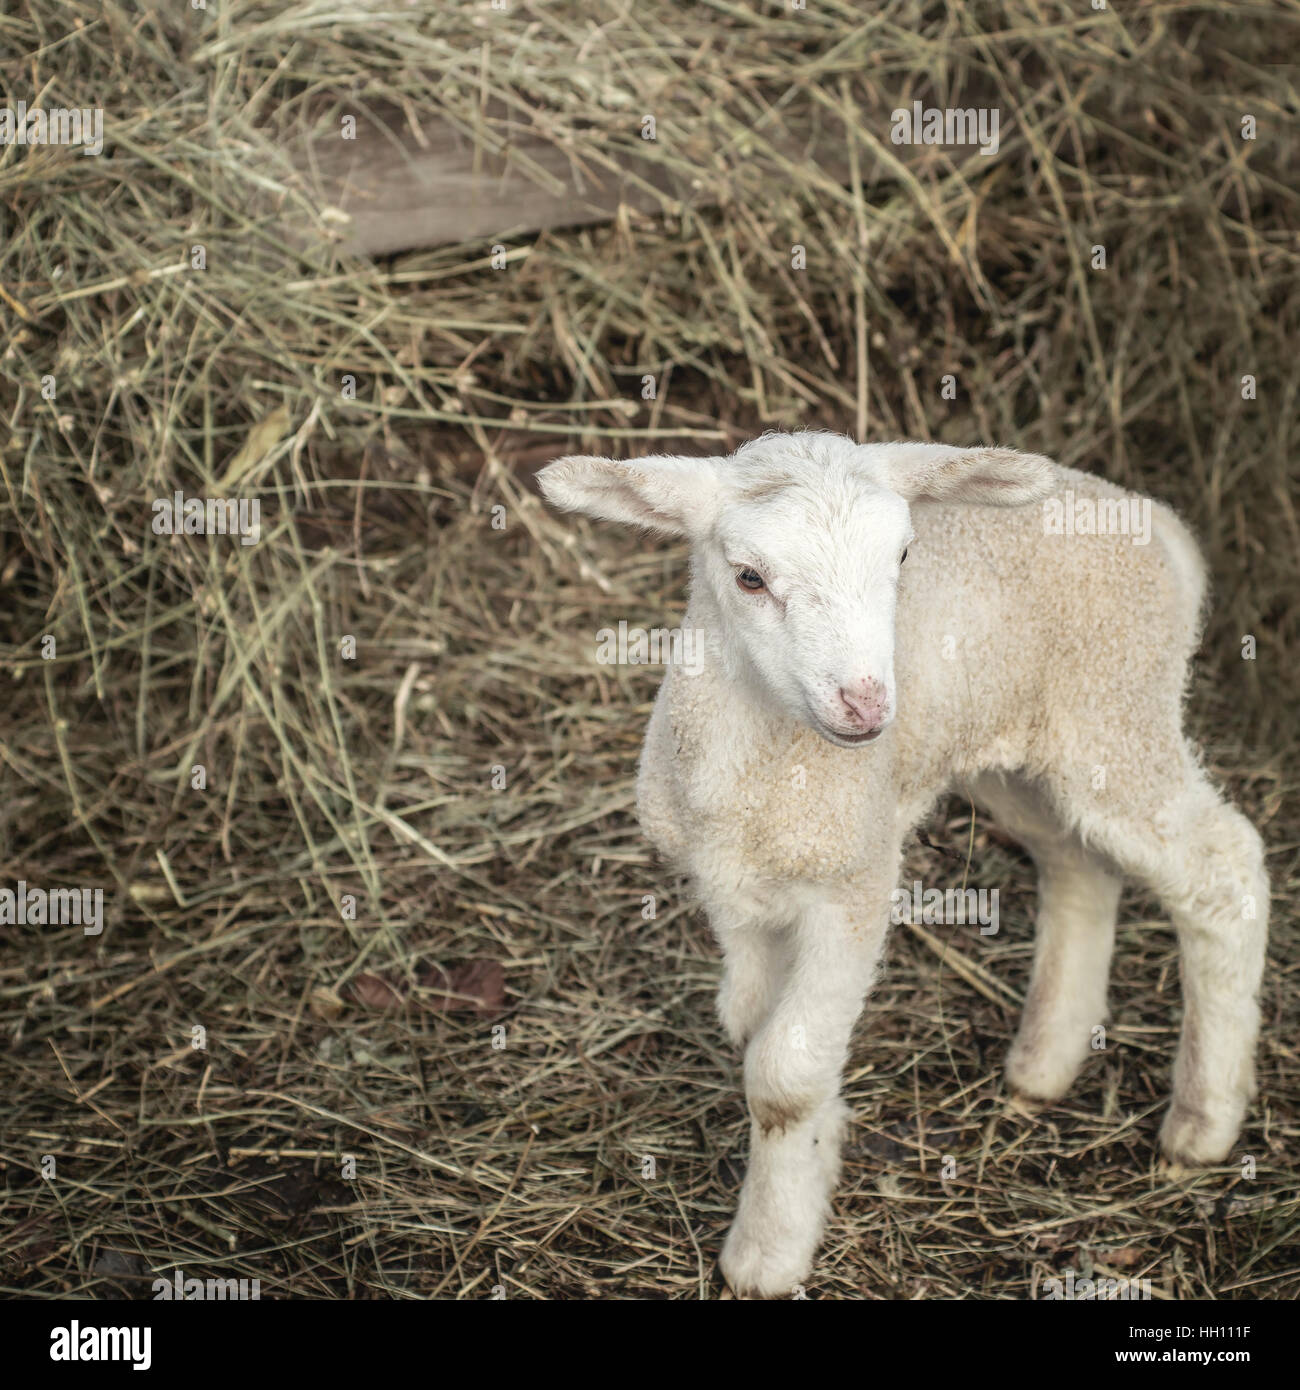 Small baby lamb on a straw, close up Stock Photo